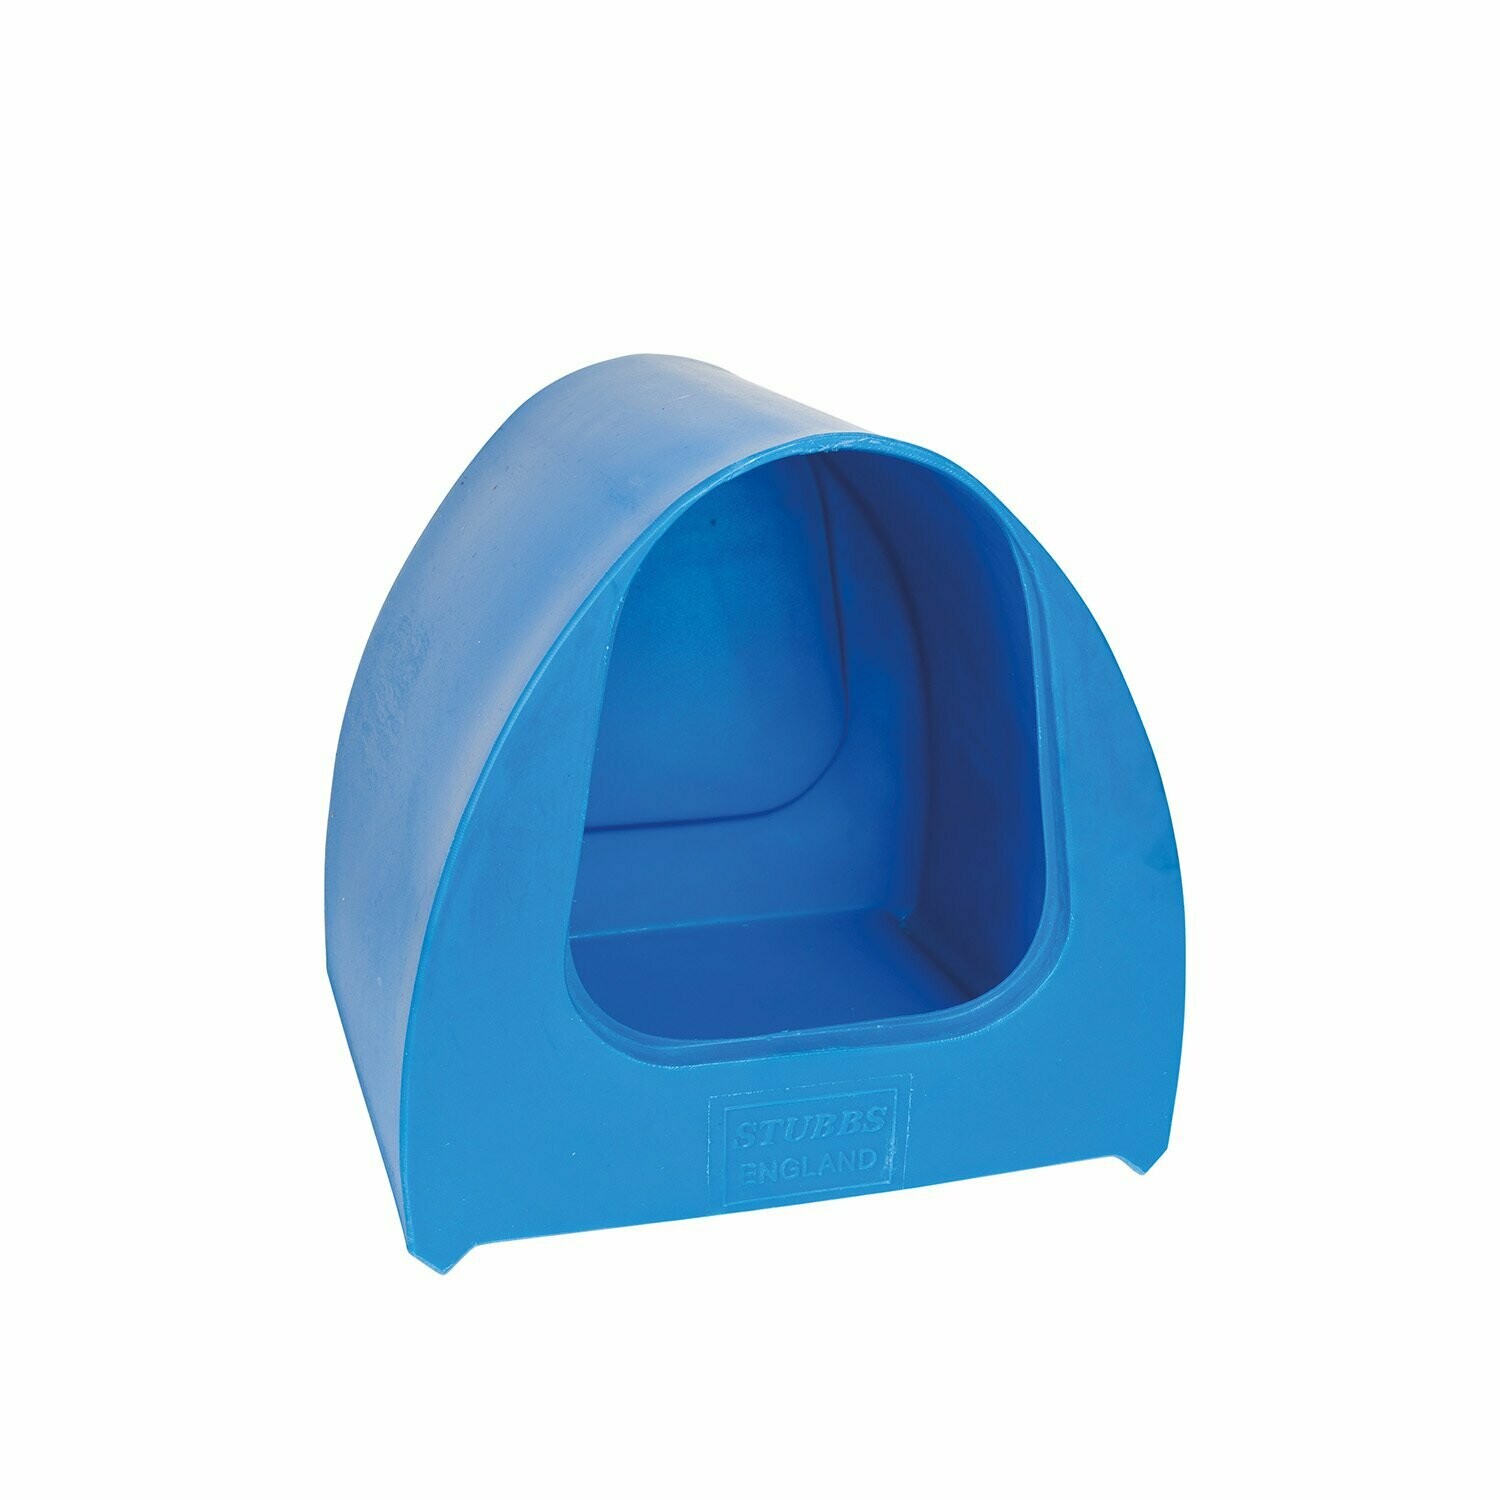 Stubbs poultry palace - great covered dust bath - blue*